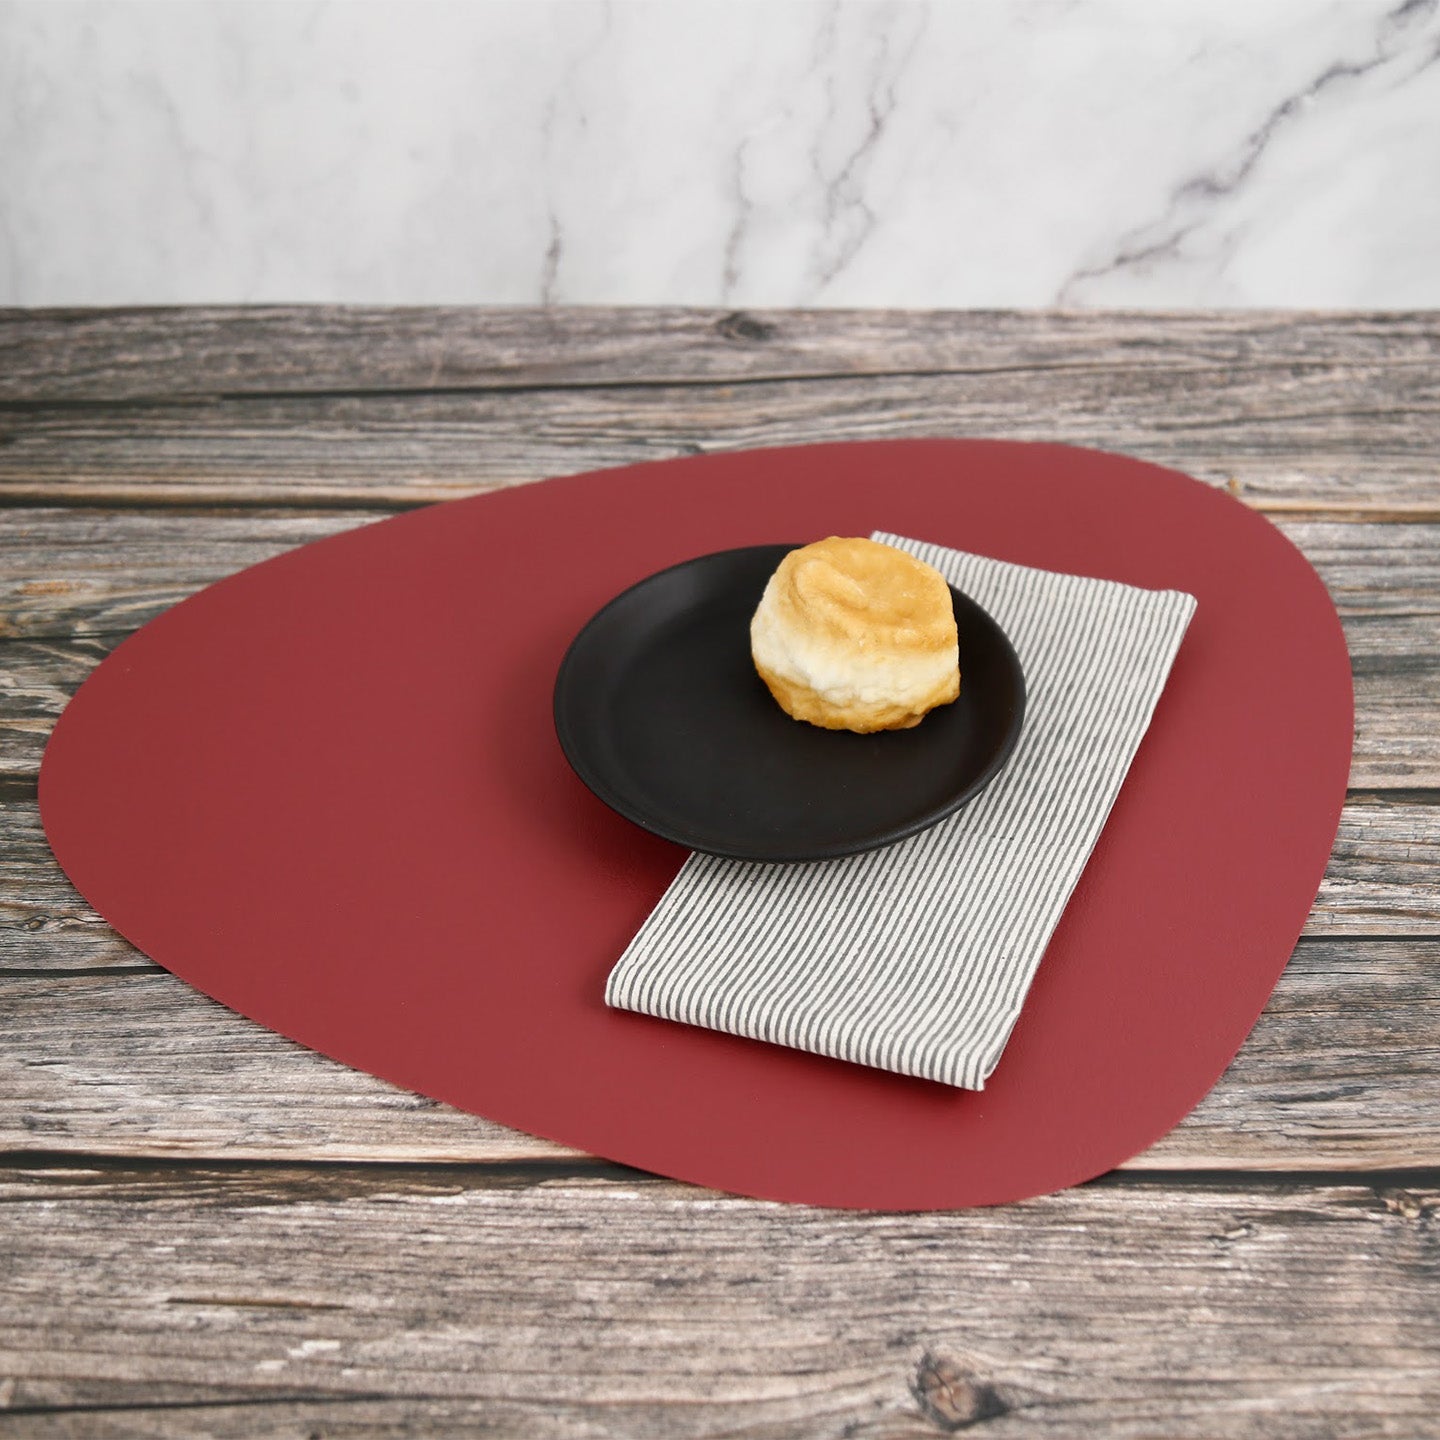 Faux Leather Round Placemat